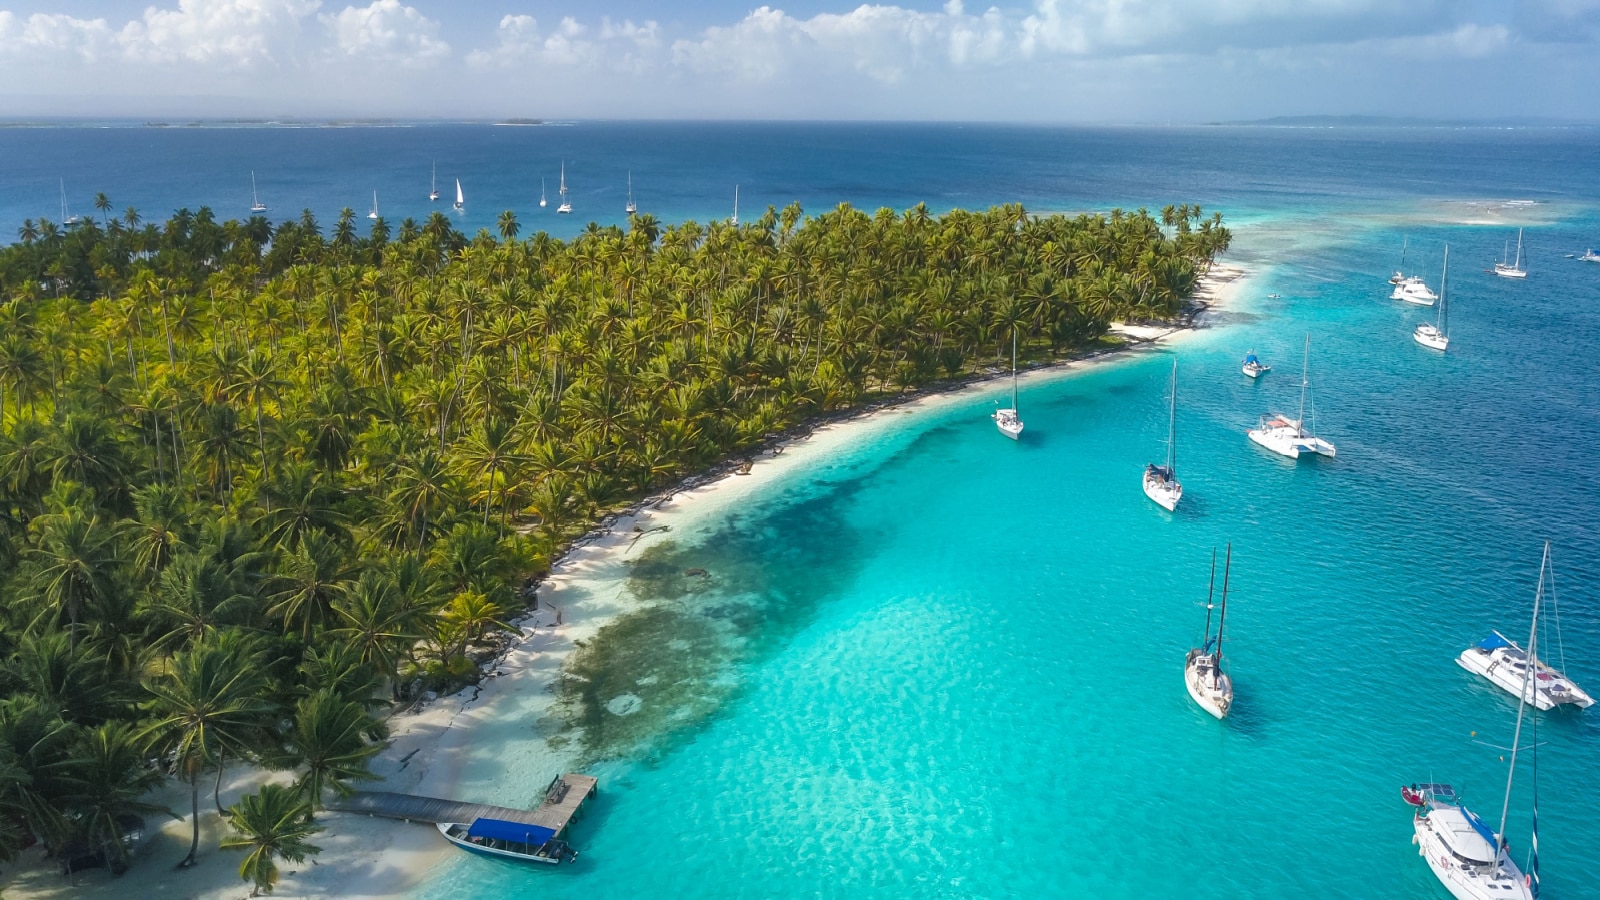 San Blas Islands, Panama - Drone Aerial View of many Sailboats & Sailing Yachts anchored in turquoise Water of Blue Lagoon next to white Sand Beach of Tropical Caribbean Island with green Palm Trees.